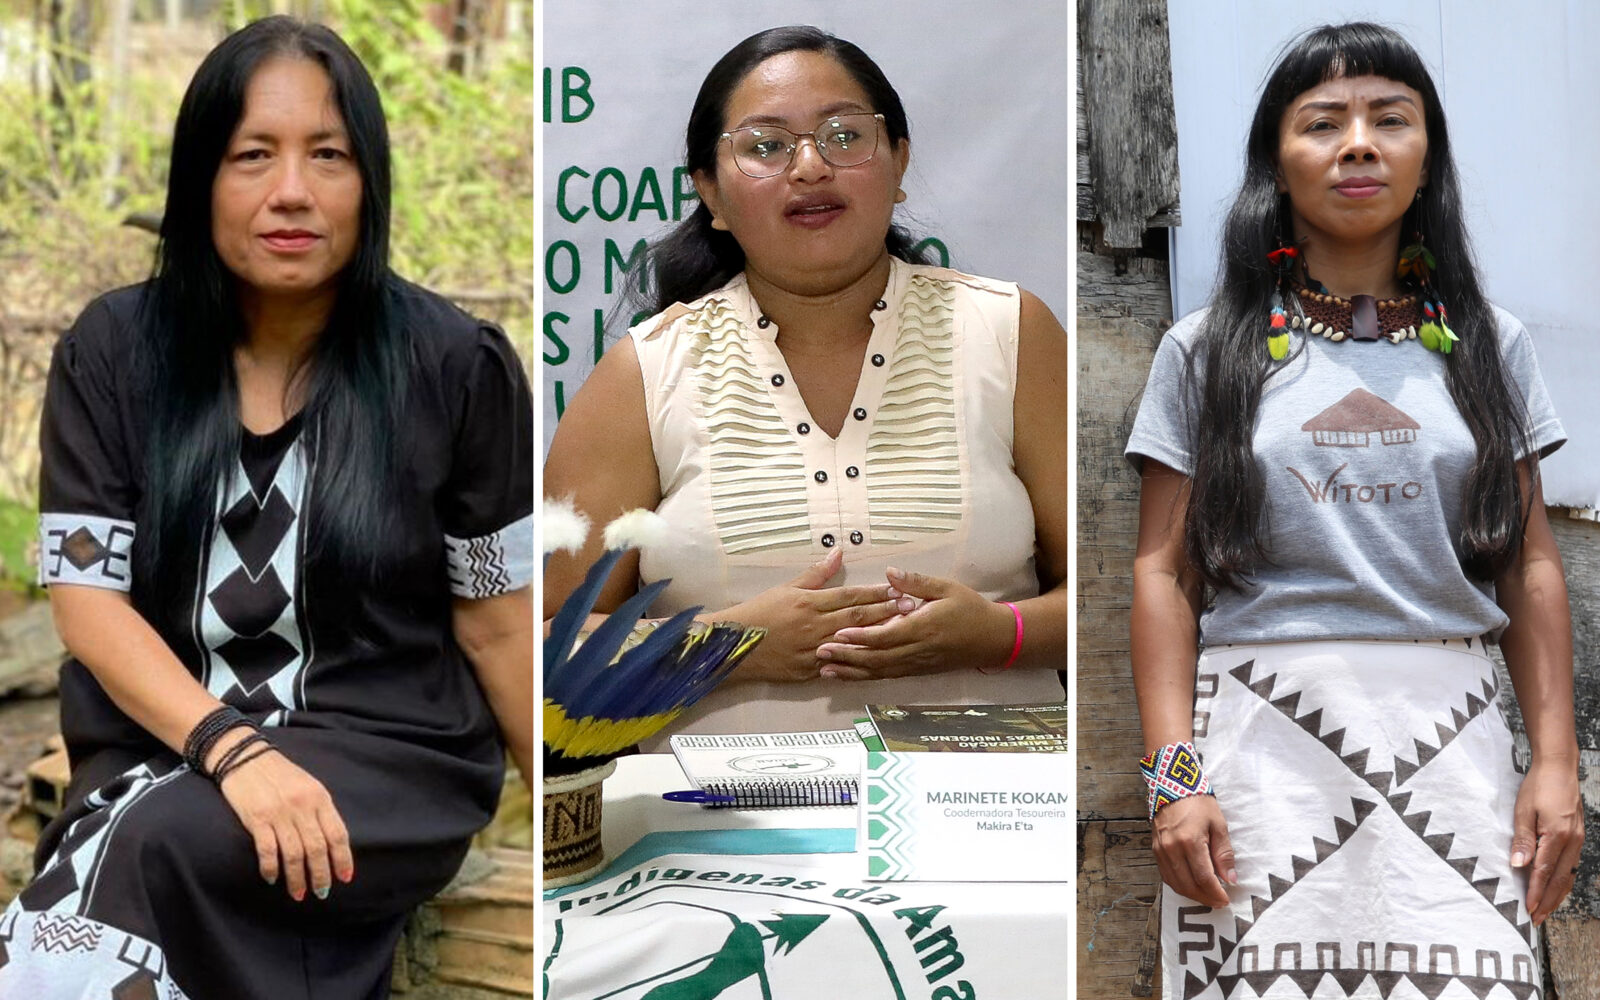 Meet 3 Women in Brazil Who Are Protecting the Amazon Rainforest